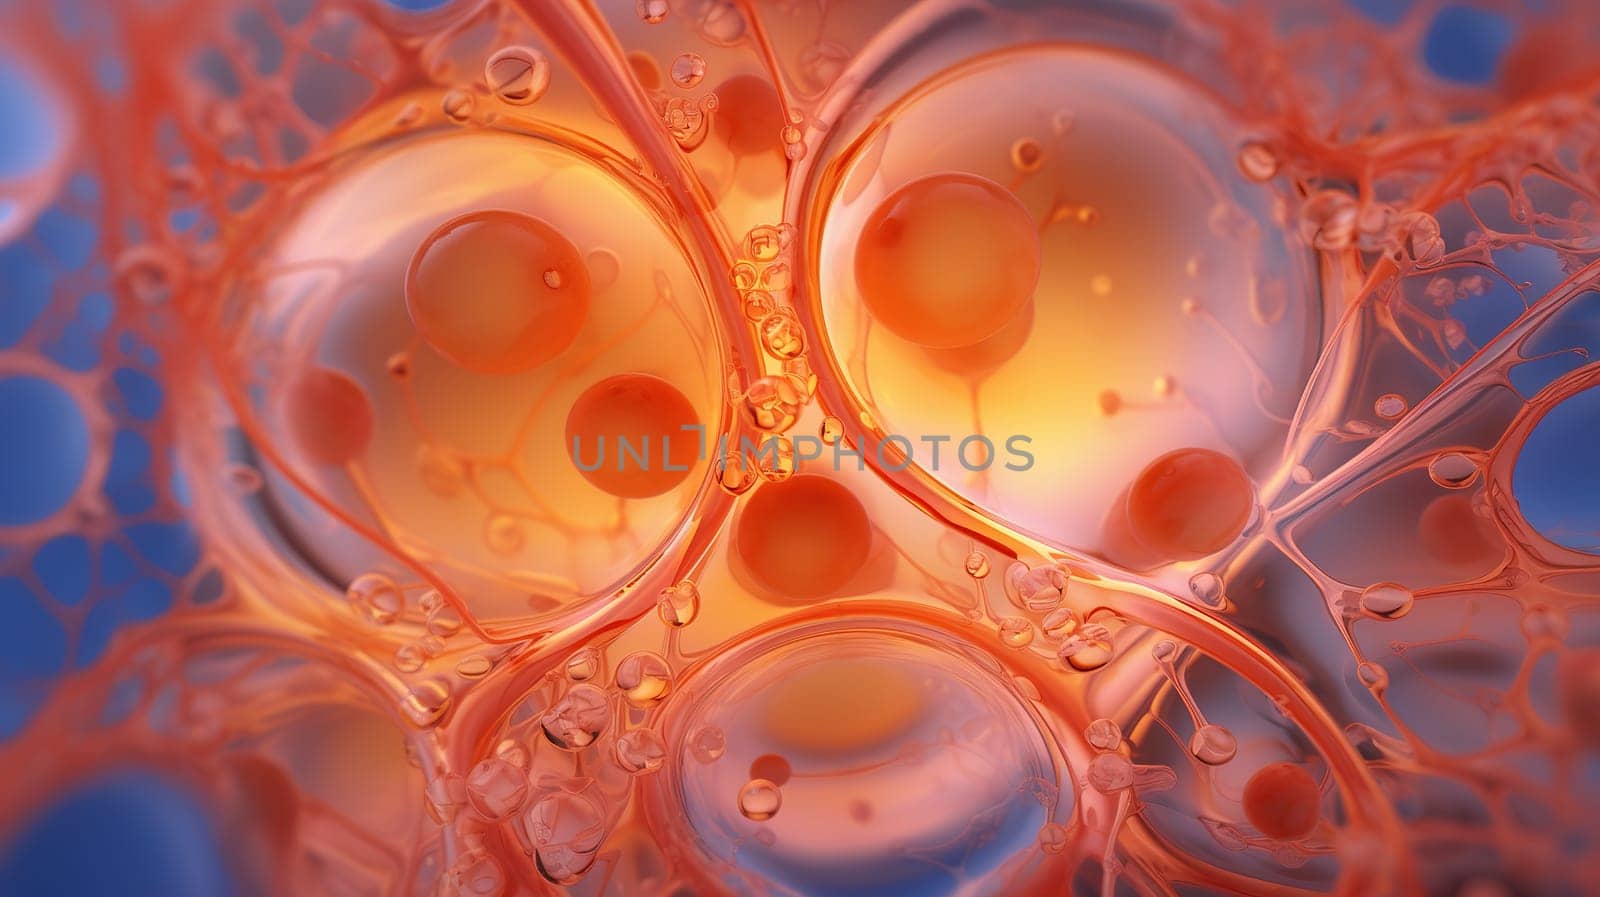 fat cells, adipocytes or blood cells in body tissues under a microscope, abstract molecular cellular structure by KaterinaDalemans